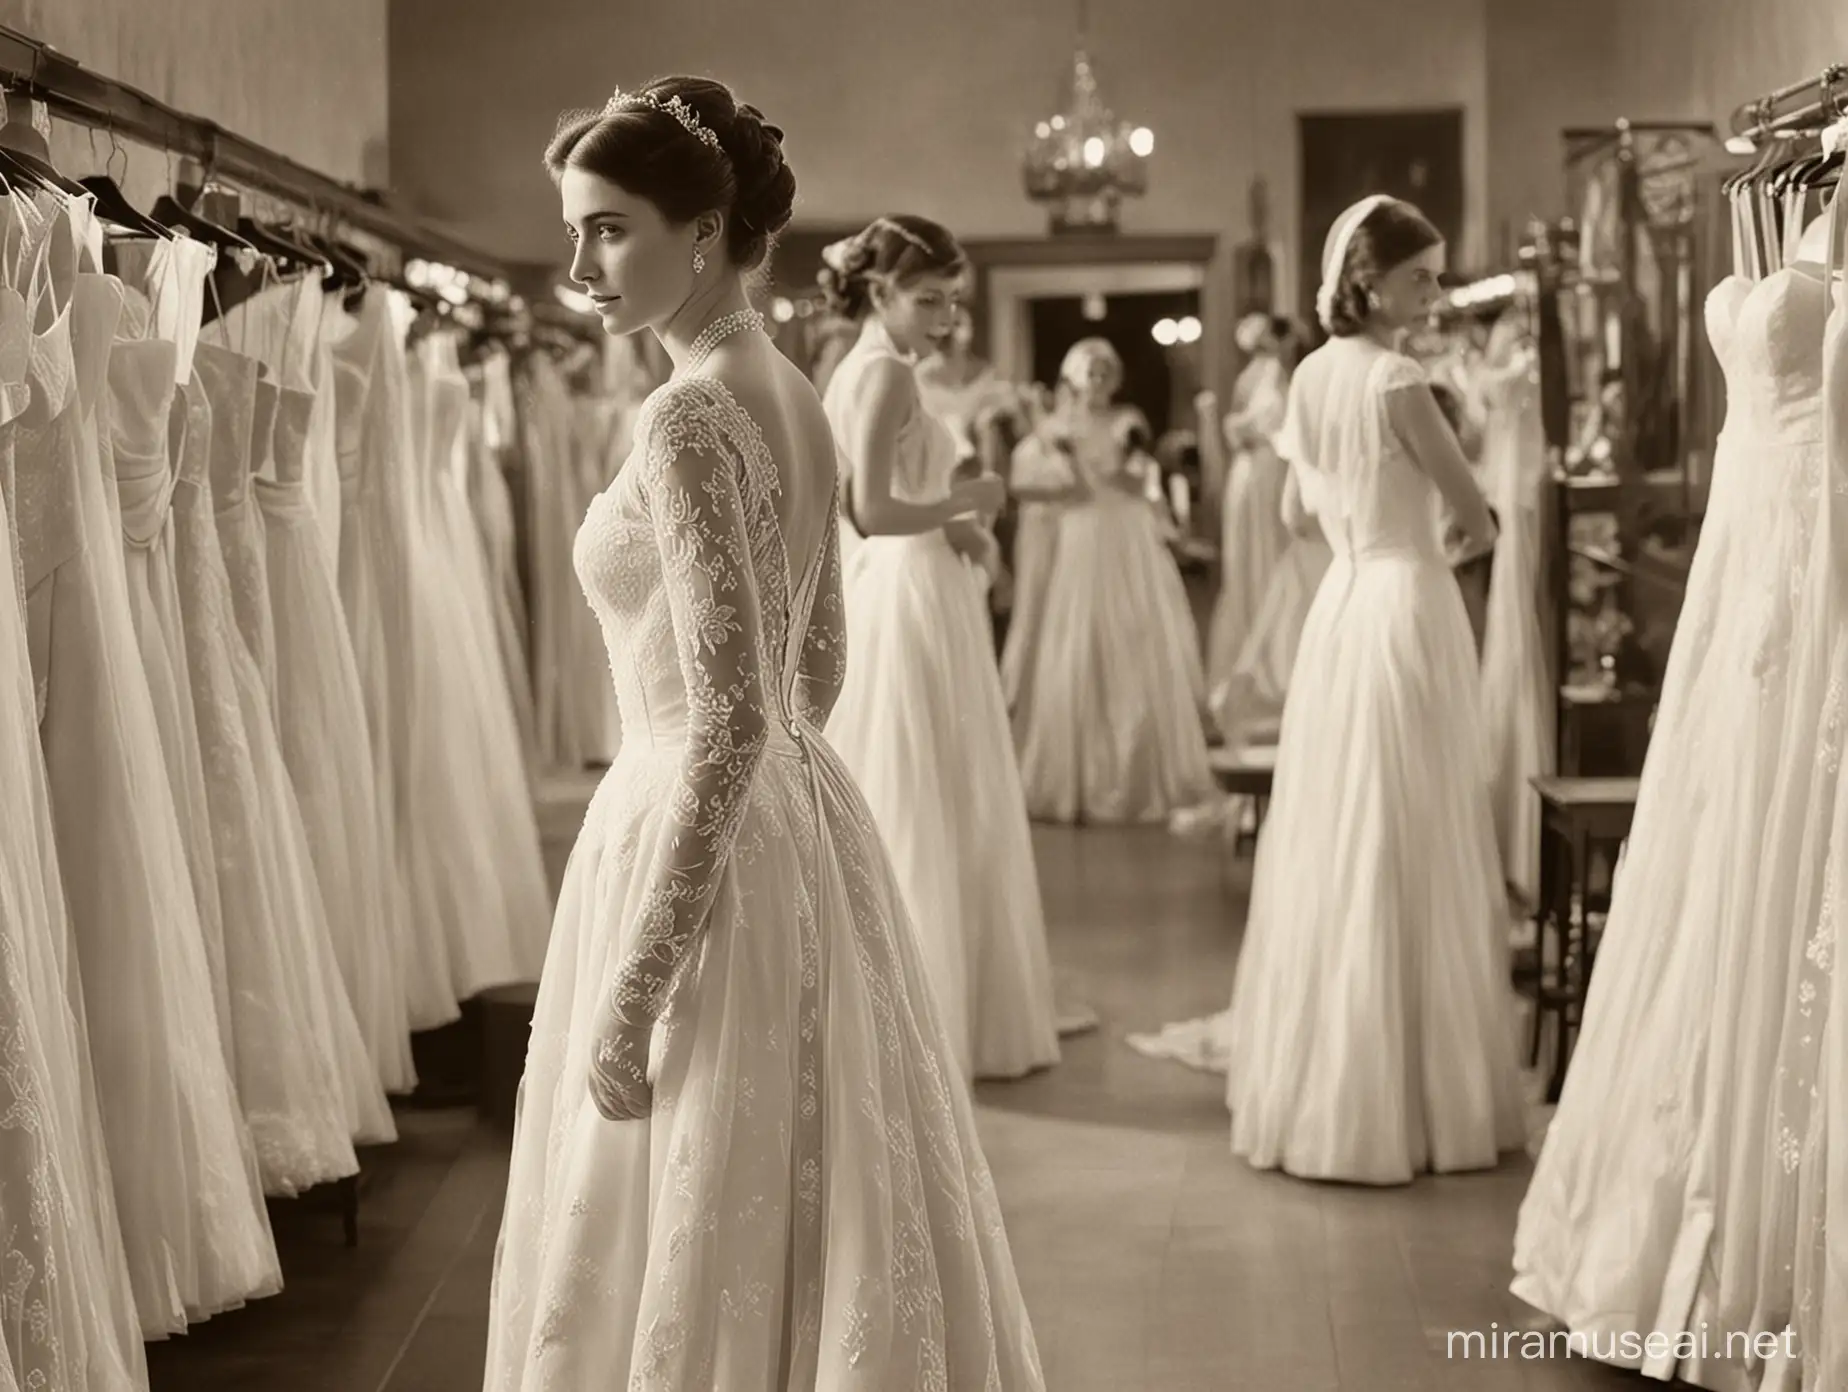 Early 20th Century Bridal Gown Shopping Scene